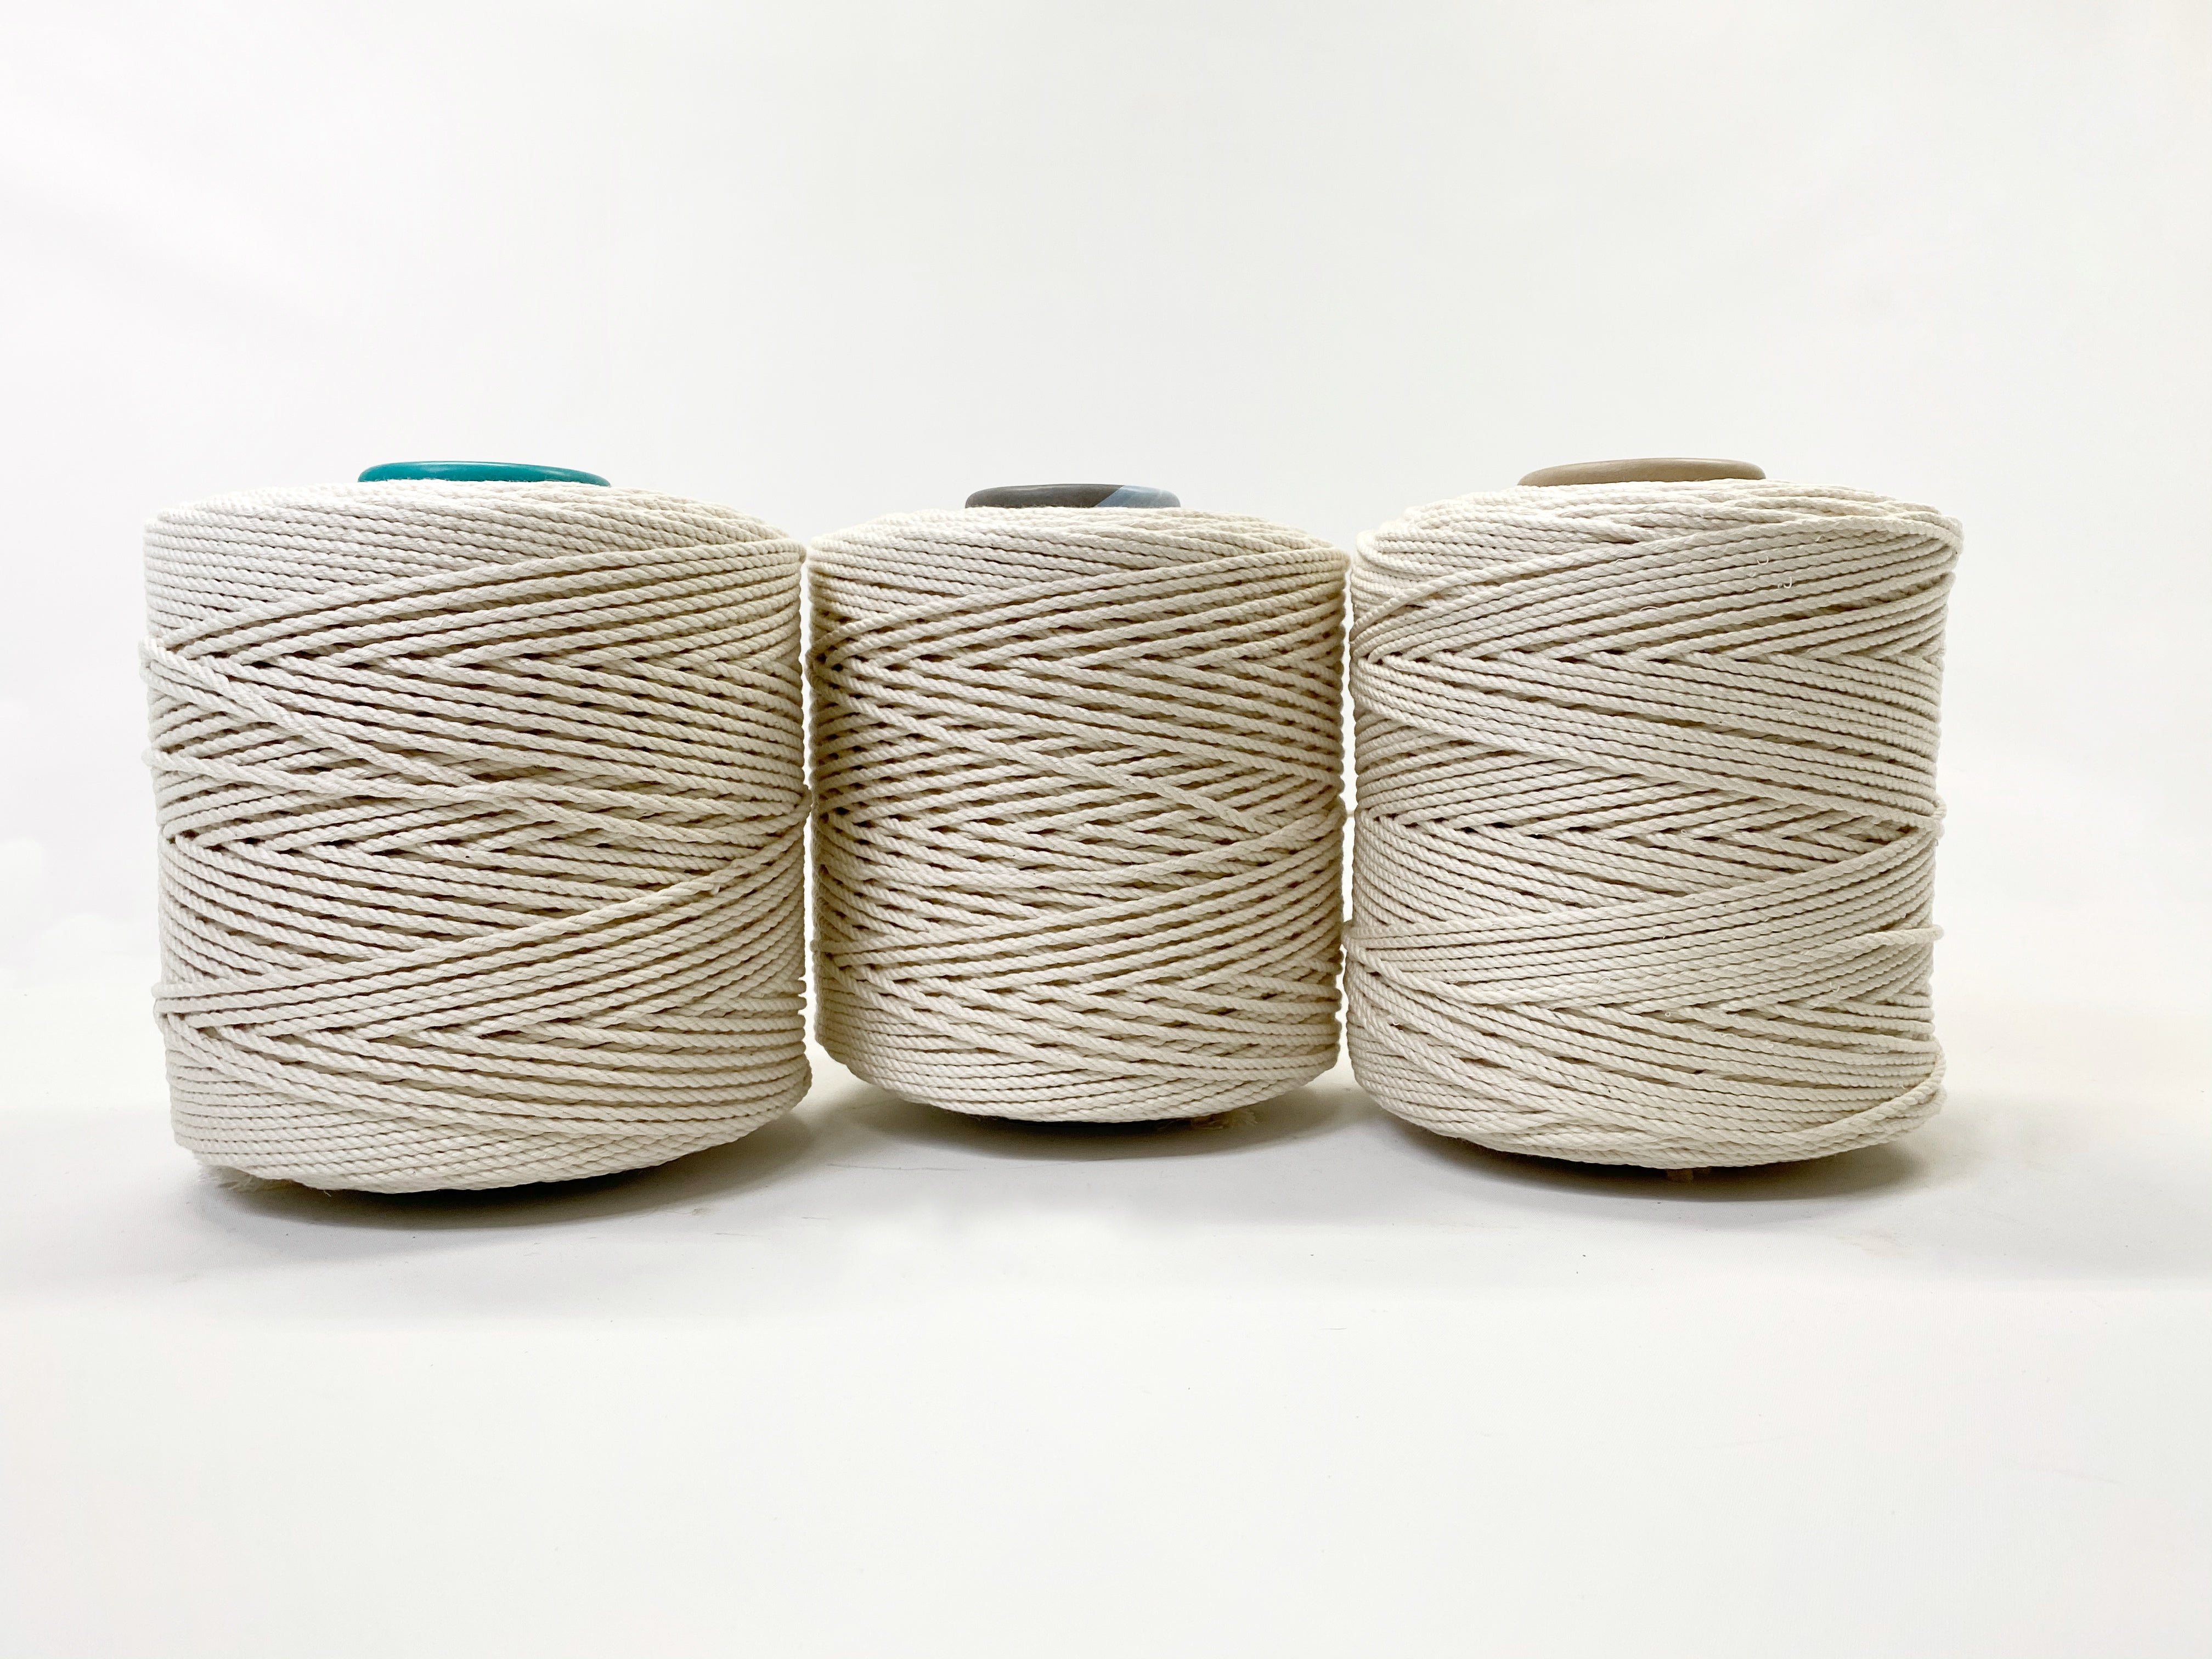 5mm Recycled Supersoft Single Twist Cotton String